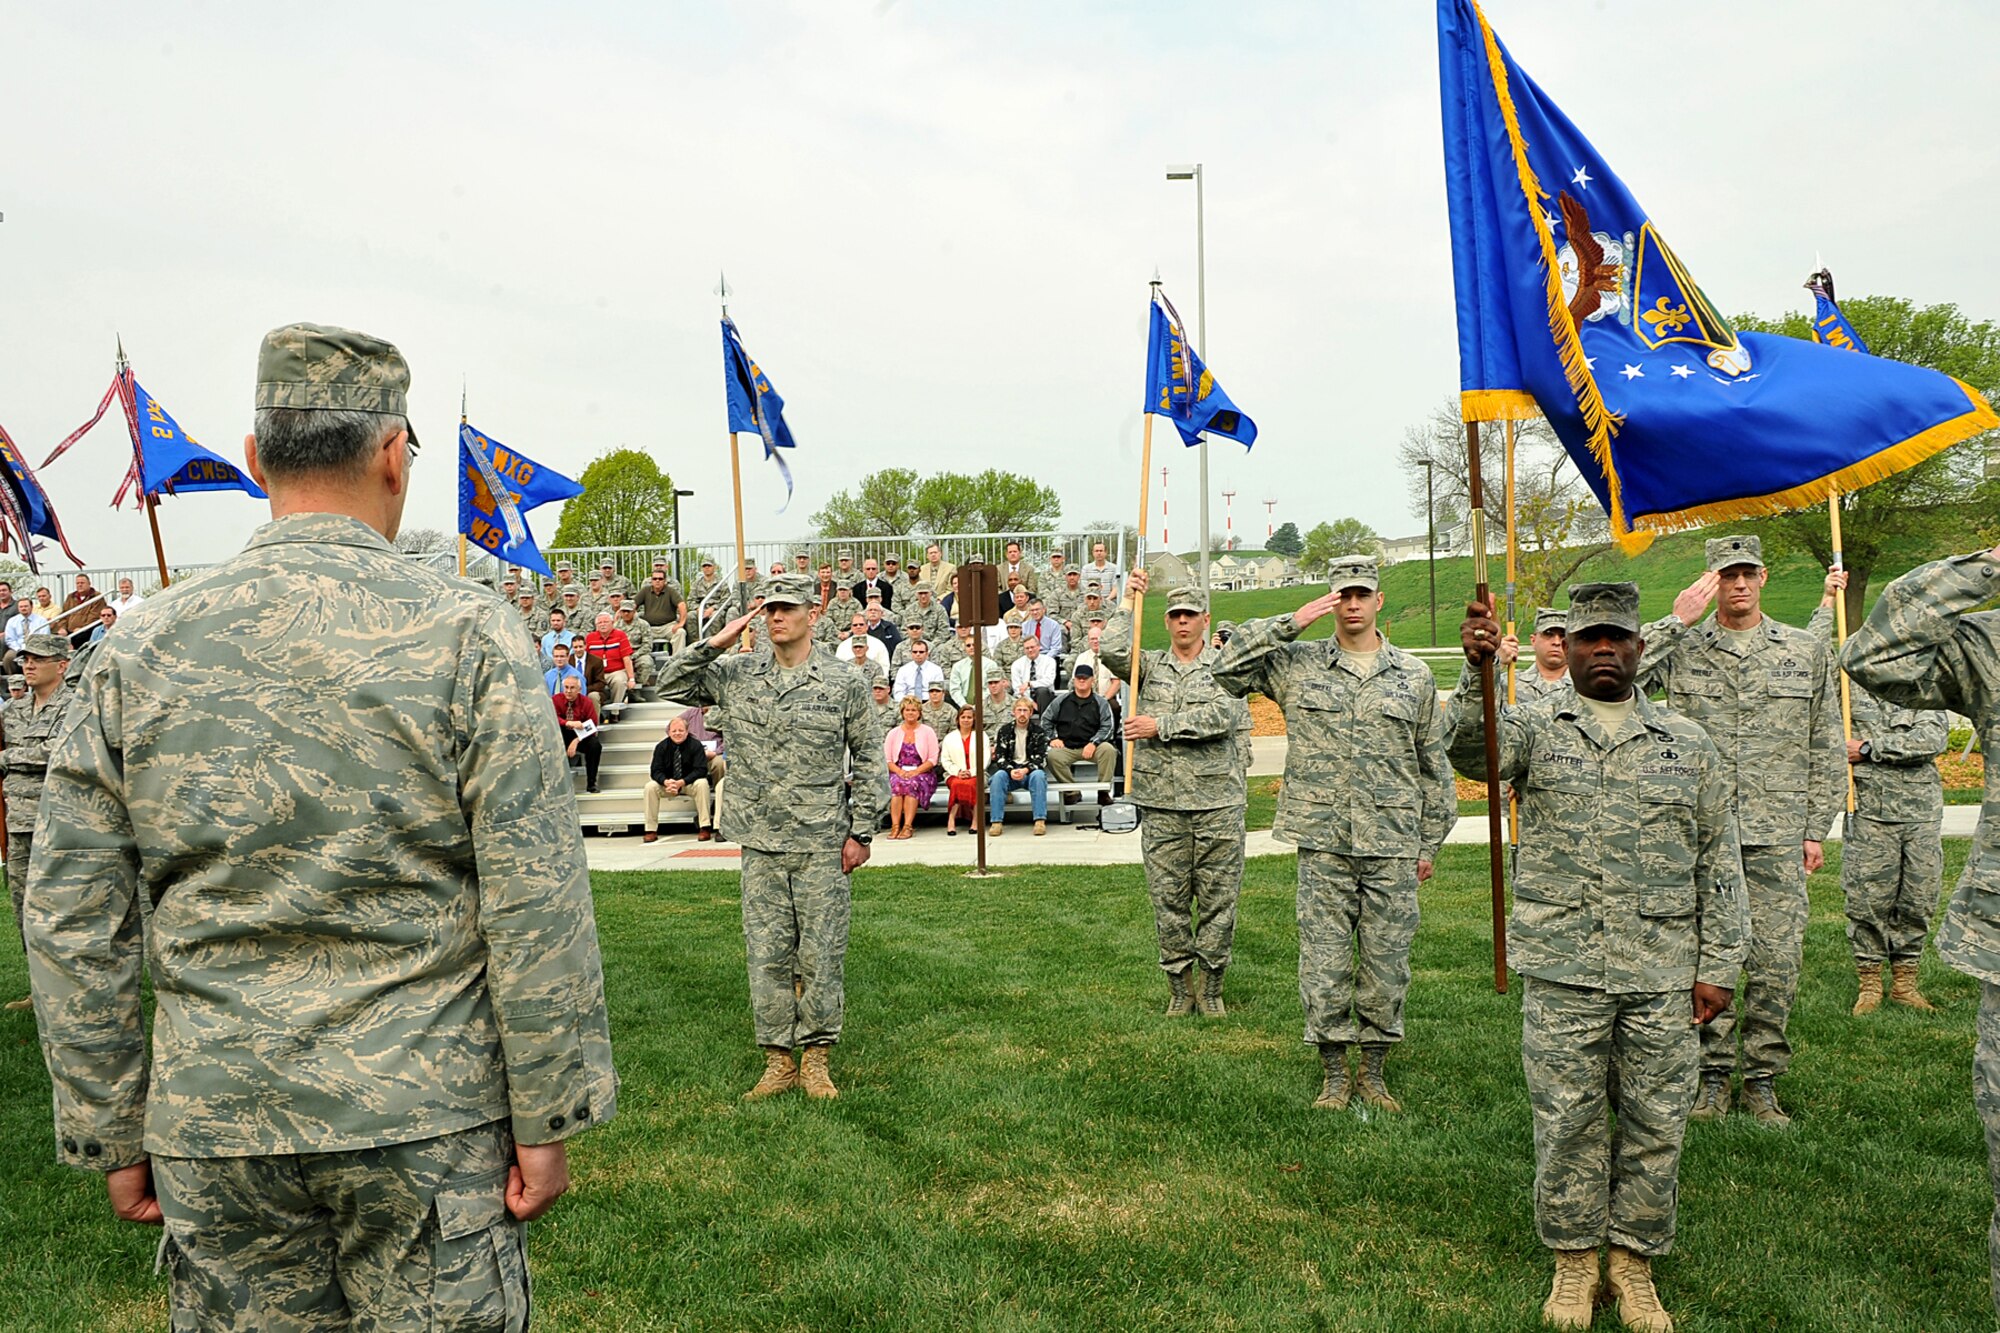 OFFUTT AIR FORCE BASE, Neb. -- Members of the Air Force Weather Agency salute Col. John D. Murphy, outgoing AFWA commander, during a change of command ceremony here April 20 in front of the Lt. Gen. Thomas S. Moorman Building. The agency is comprised of more than 1,400 active-duty members, civil service employees and contractors at 14 operating locations around the world which provide centralized weather products and services, including climatological and space weather support to all branches of the armed forces. U.S. Air Force photo by Charles Haymond